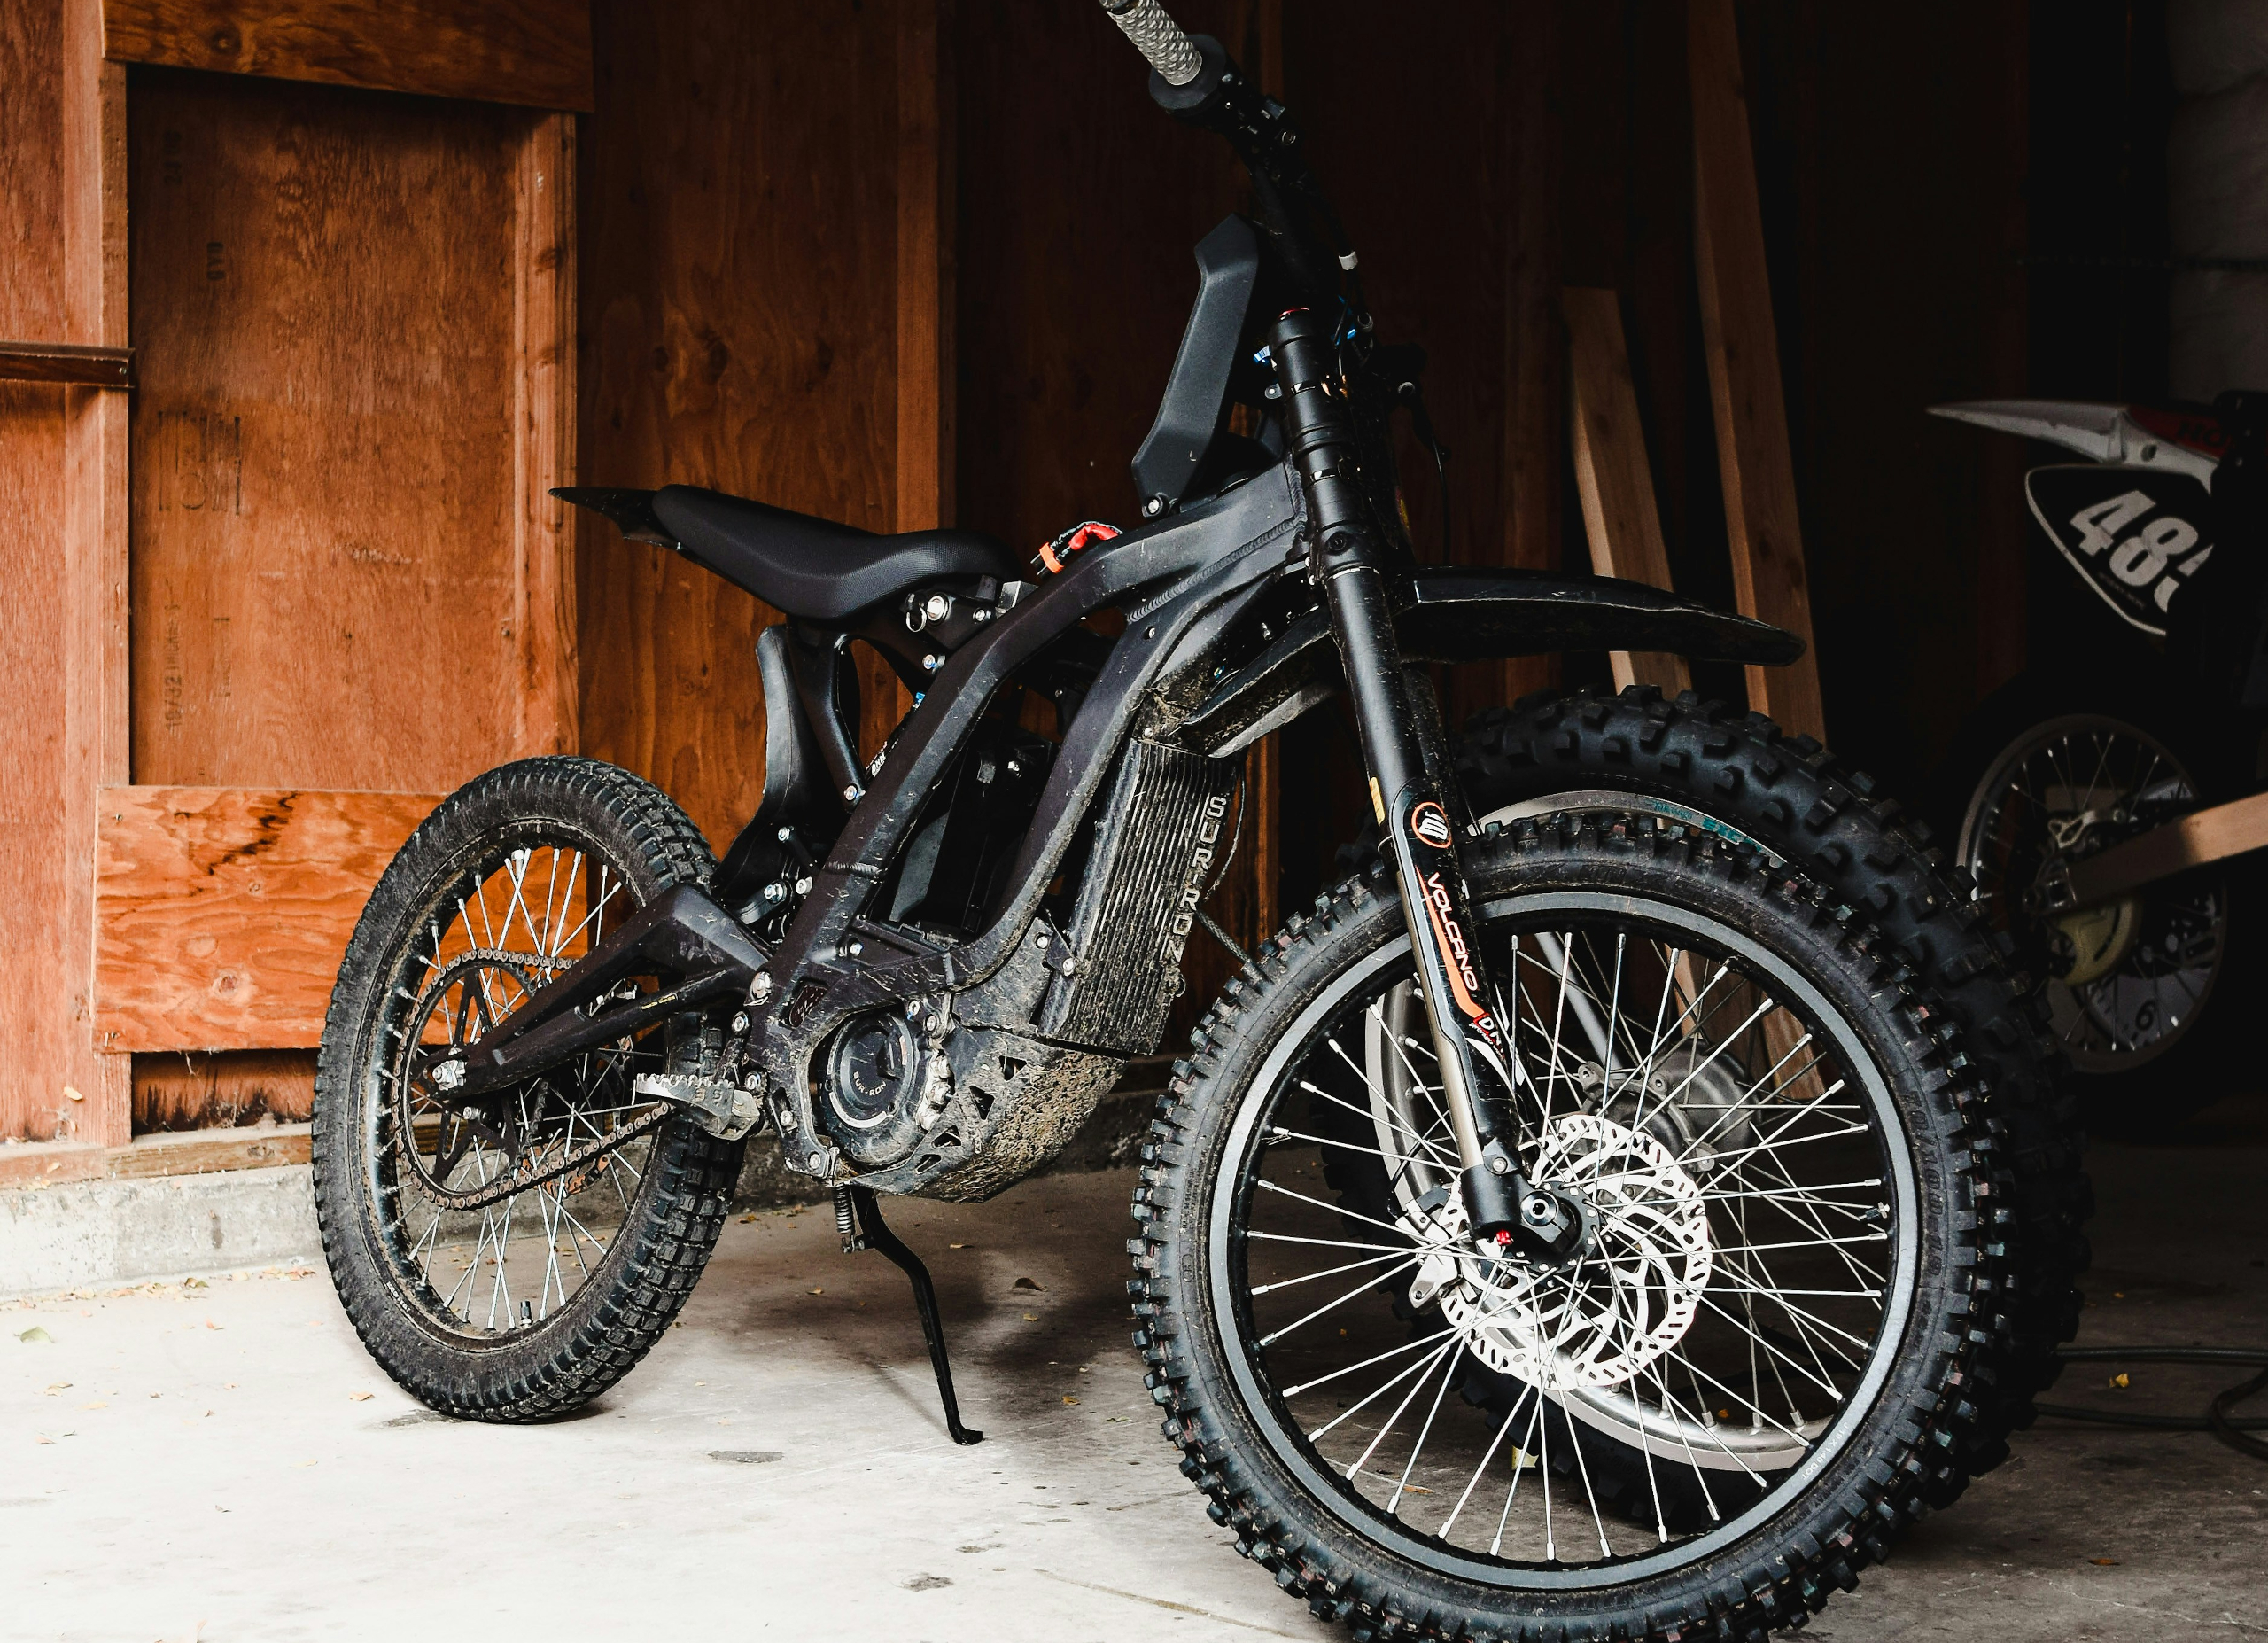 The Best Electric Pit Bike: Buy It or Build It?